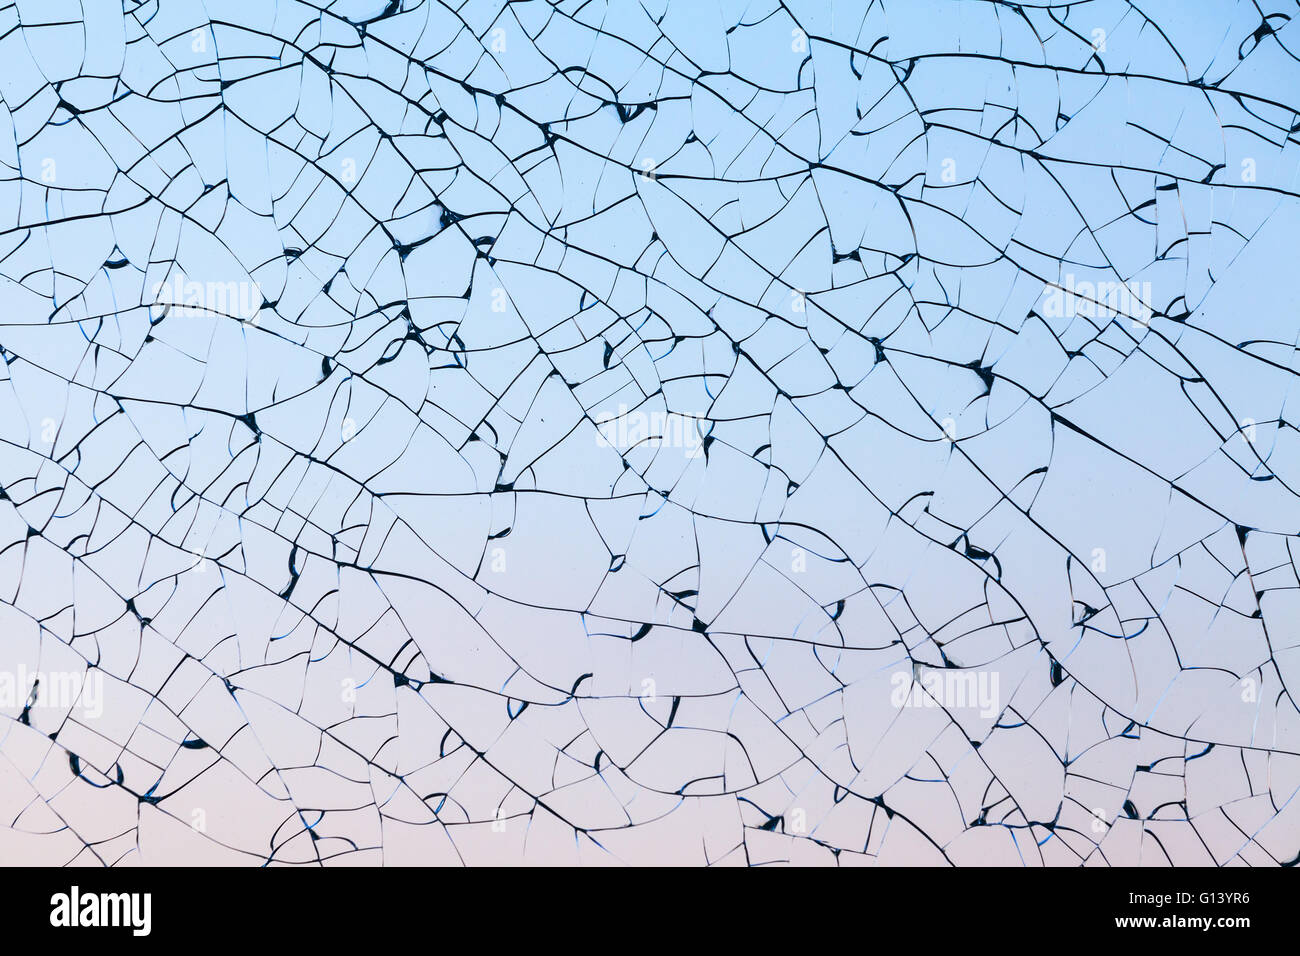 Broken glass texture with cracks pattern over blue background Stock Photo